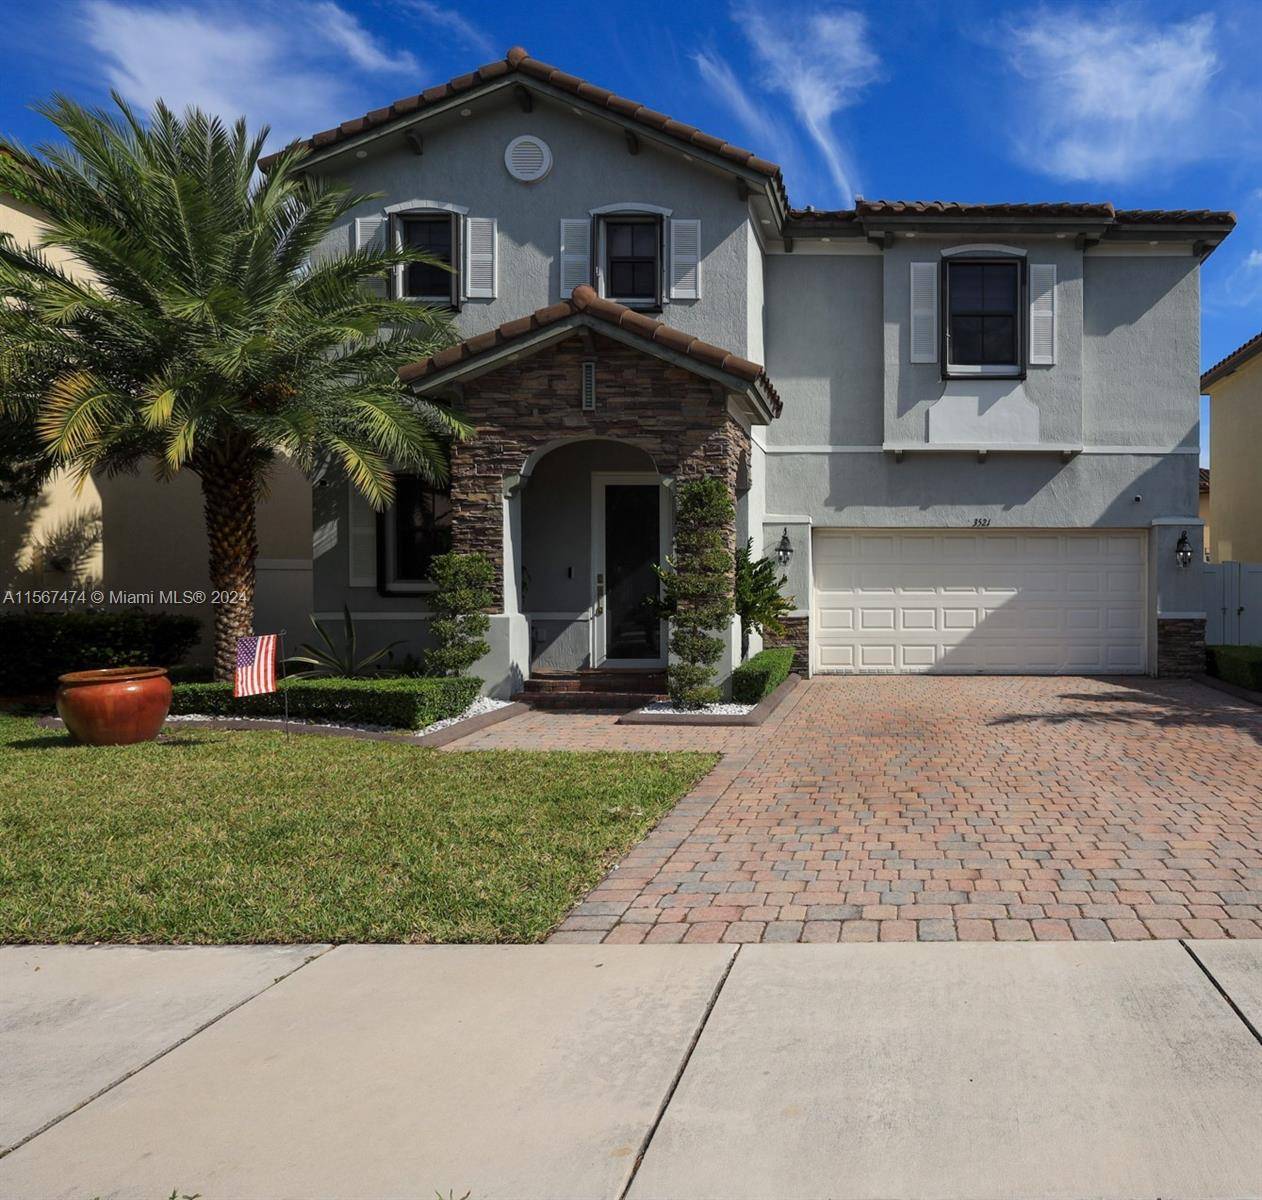 Welcome to the home of your dreams in Hialeah, Florida !